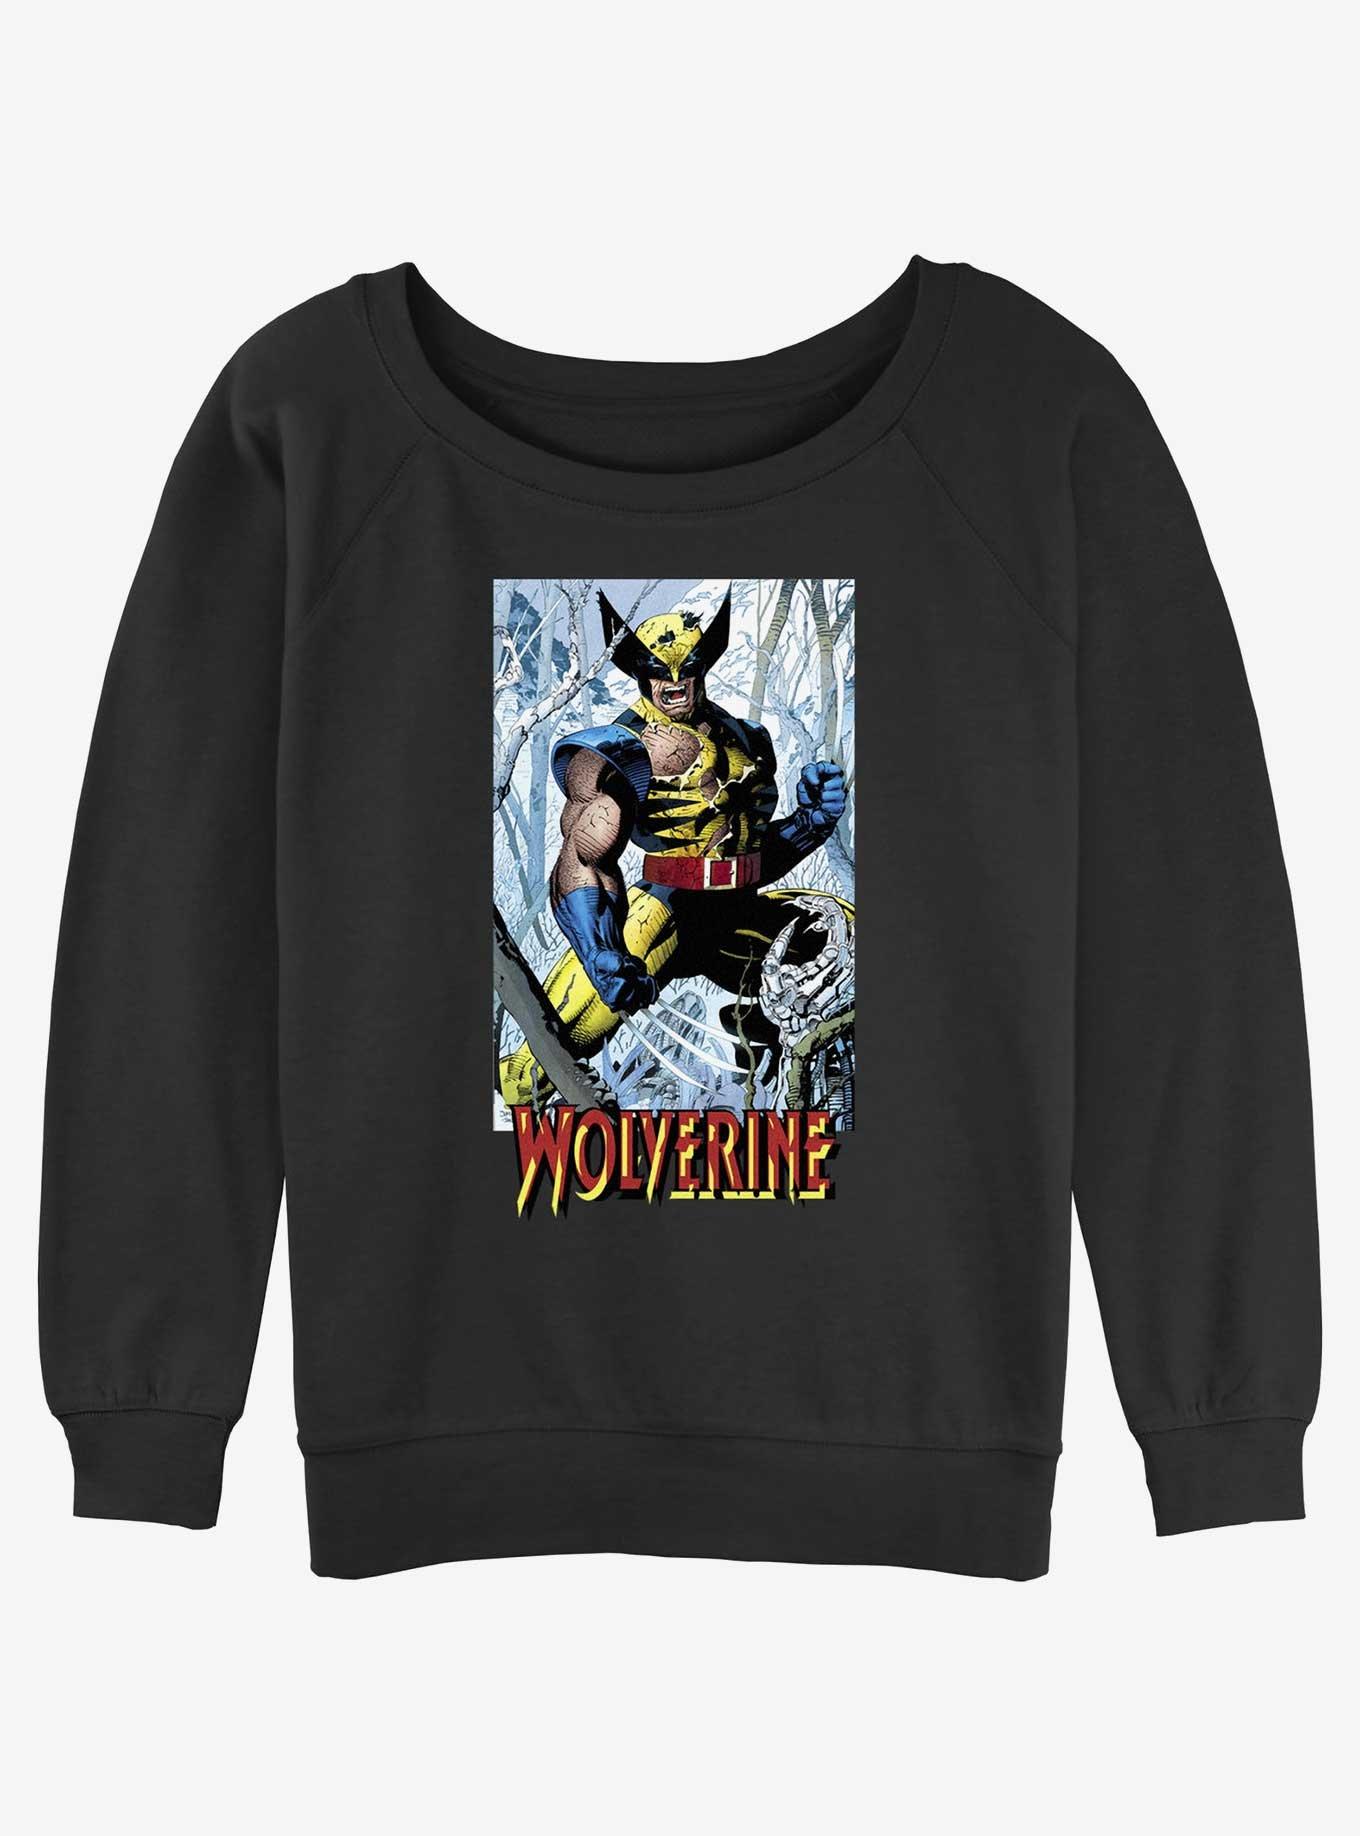 Wolverine Discipline 22 From Then Til Now Trading Card Womens Slouchy Sweatshirt, BLACK, hi-res